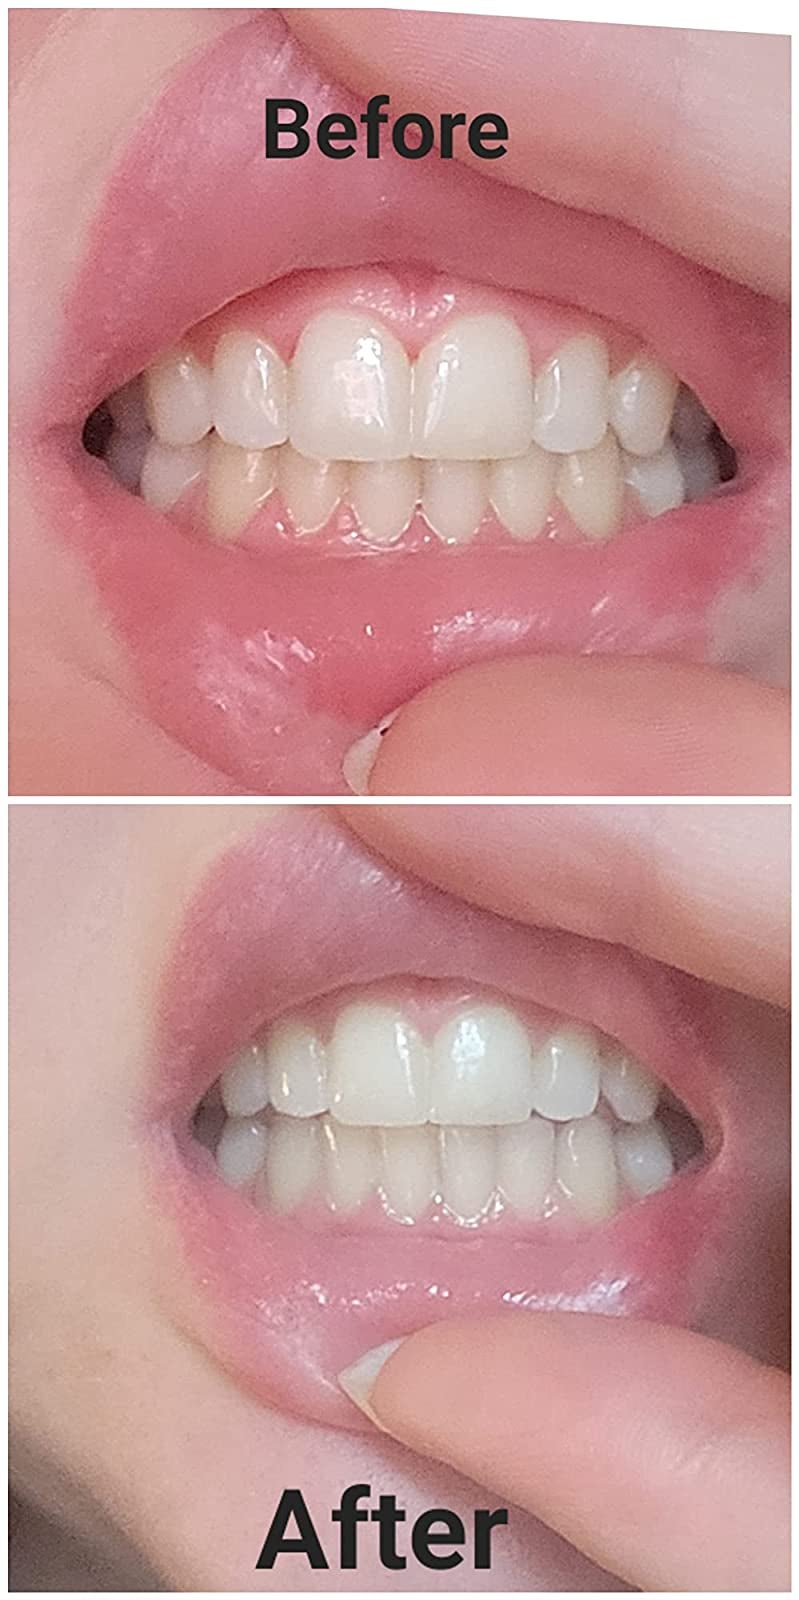 before and after photo showing the teeth-whitening pen dramatically whitened a reviewer's teeth